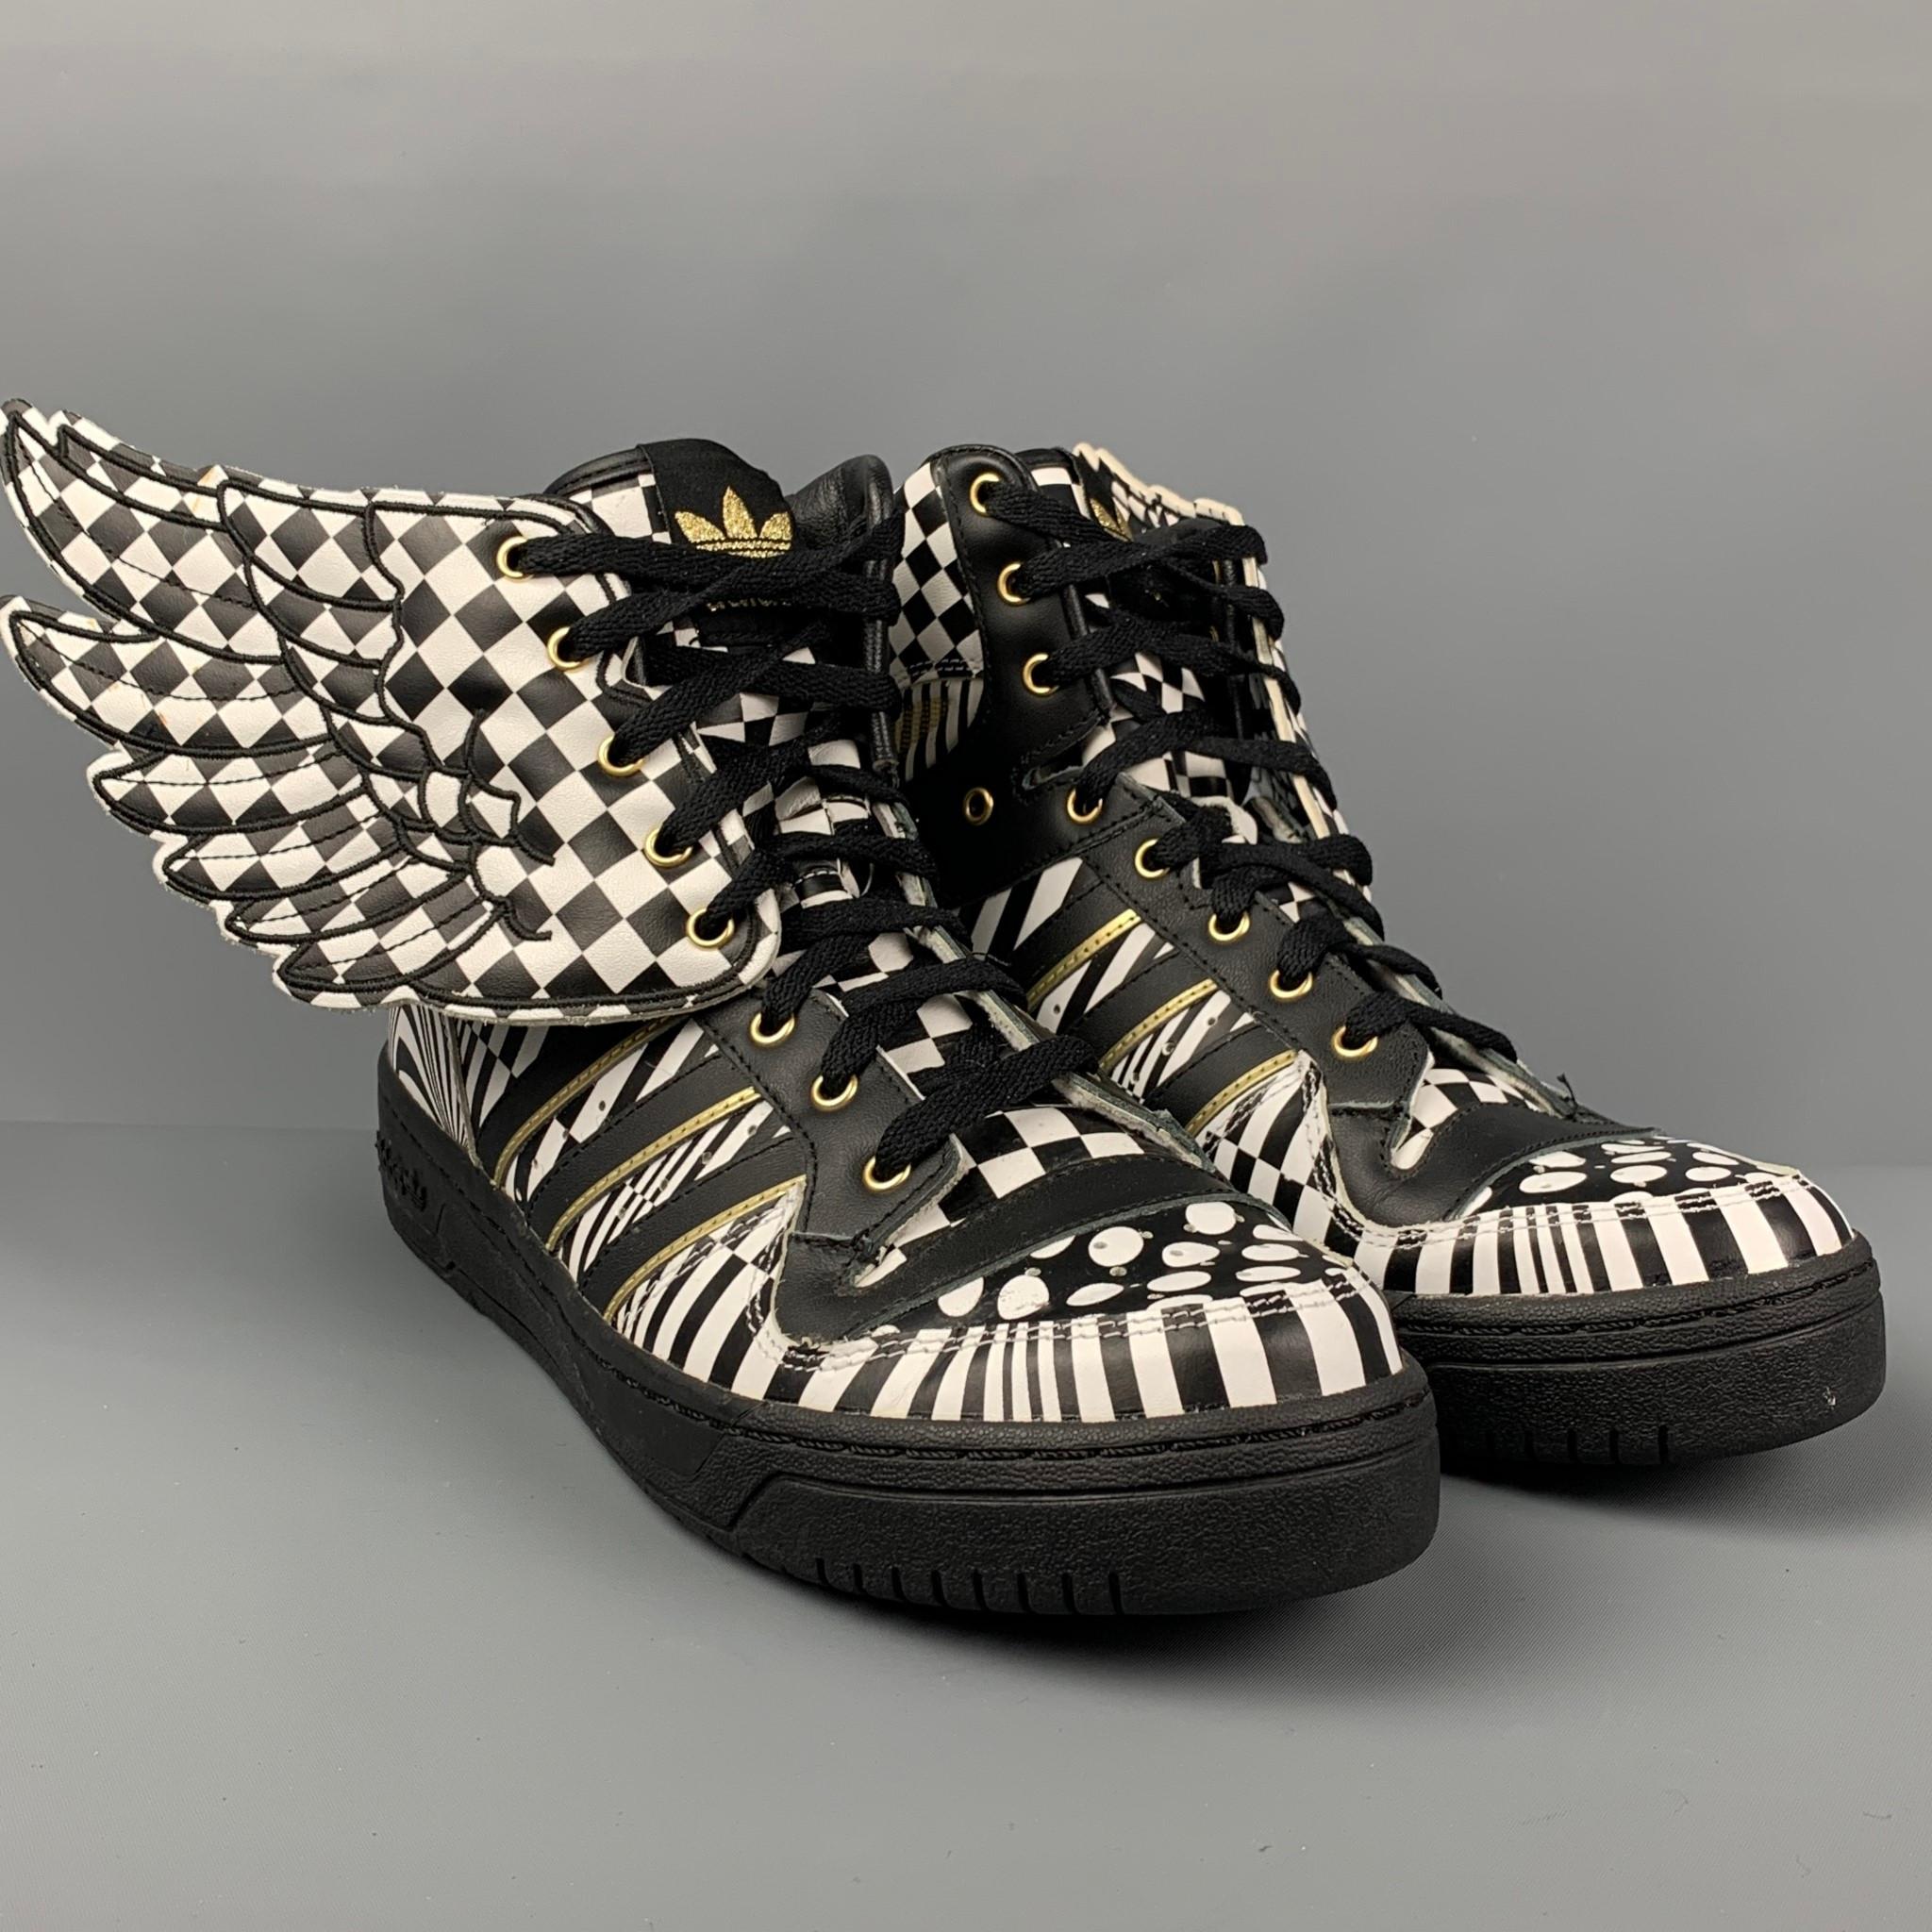 JEREMY SCOTT x ADIDAS sneakers comes in a black & white geometric leather with a gold trim featuring a detachable wing detail, high top, and a lace up closure. 

Very Good Pre-Owned Condition.
Marked: 12

Outsole: 12 in. x 4 in. 